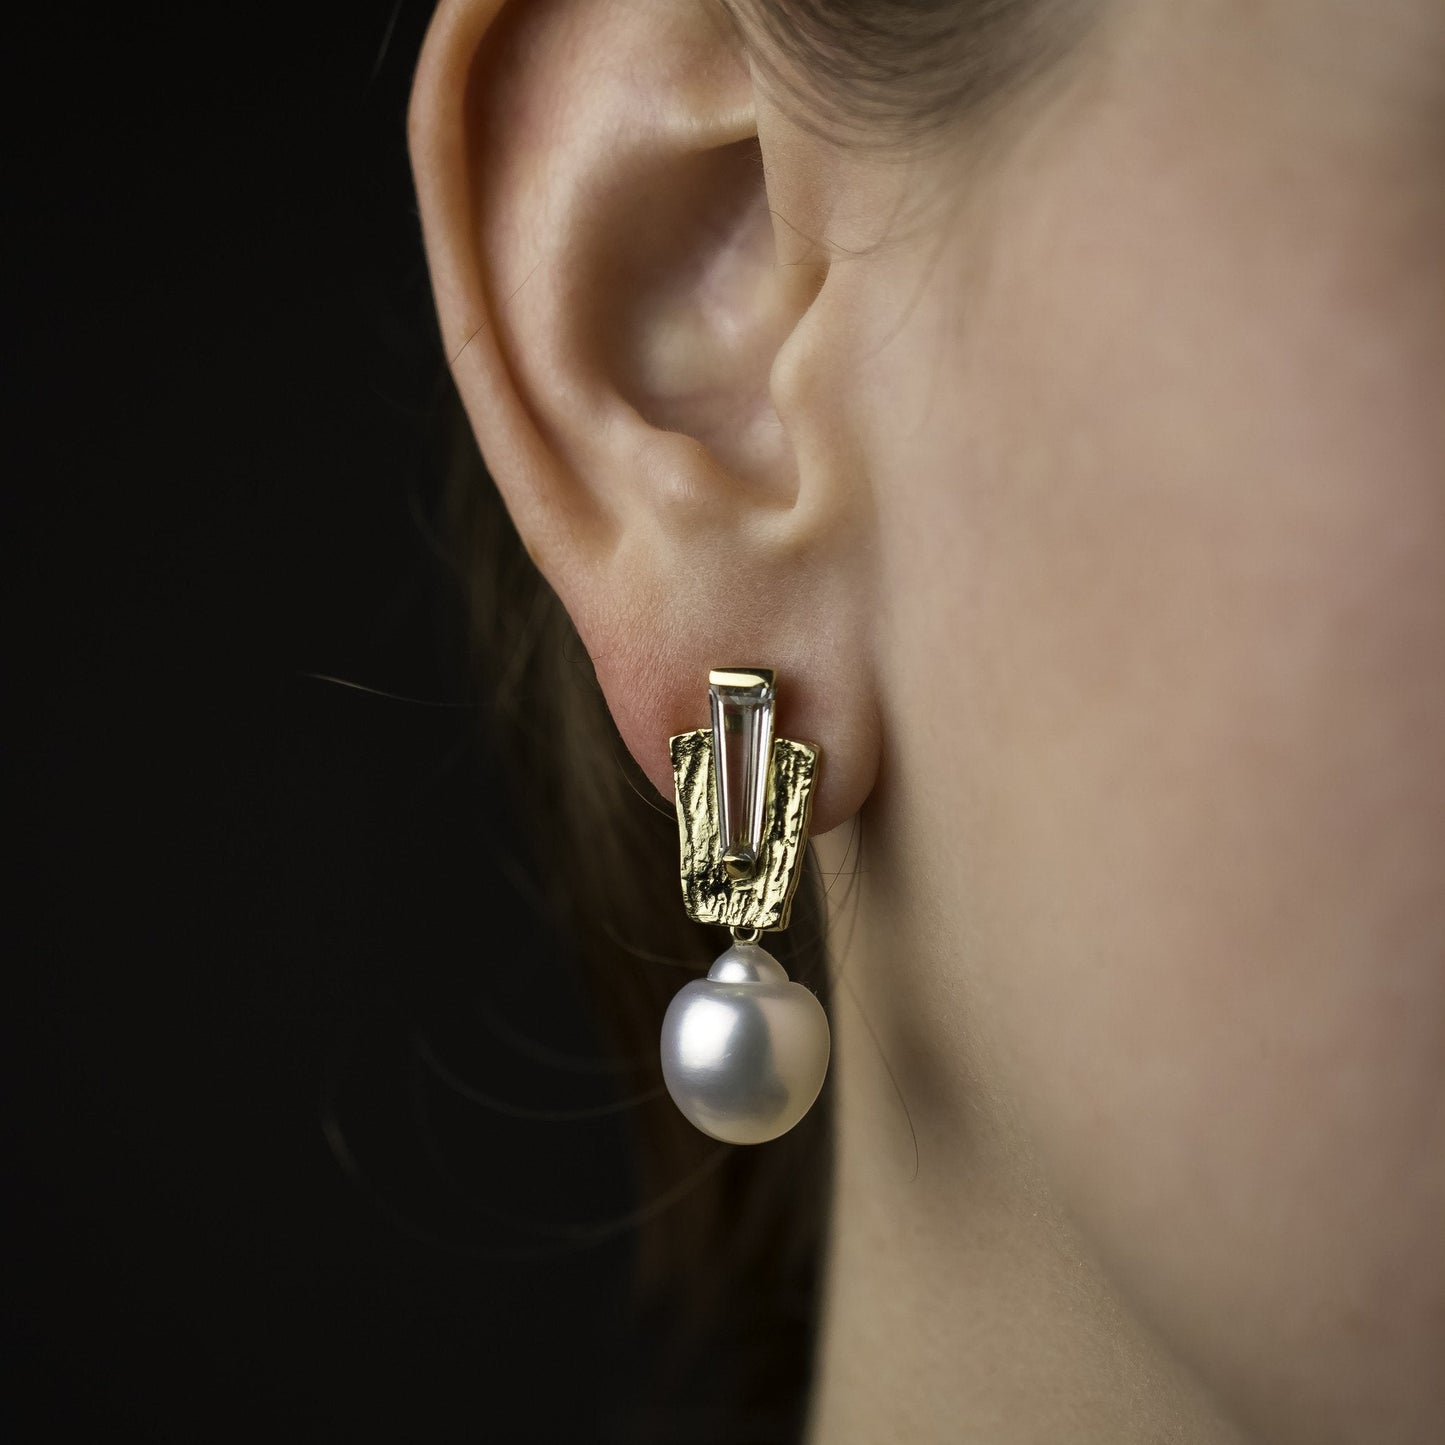 Marquee Earrings with South Sea Pearl Drops